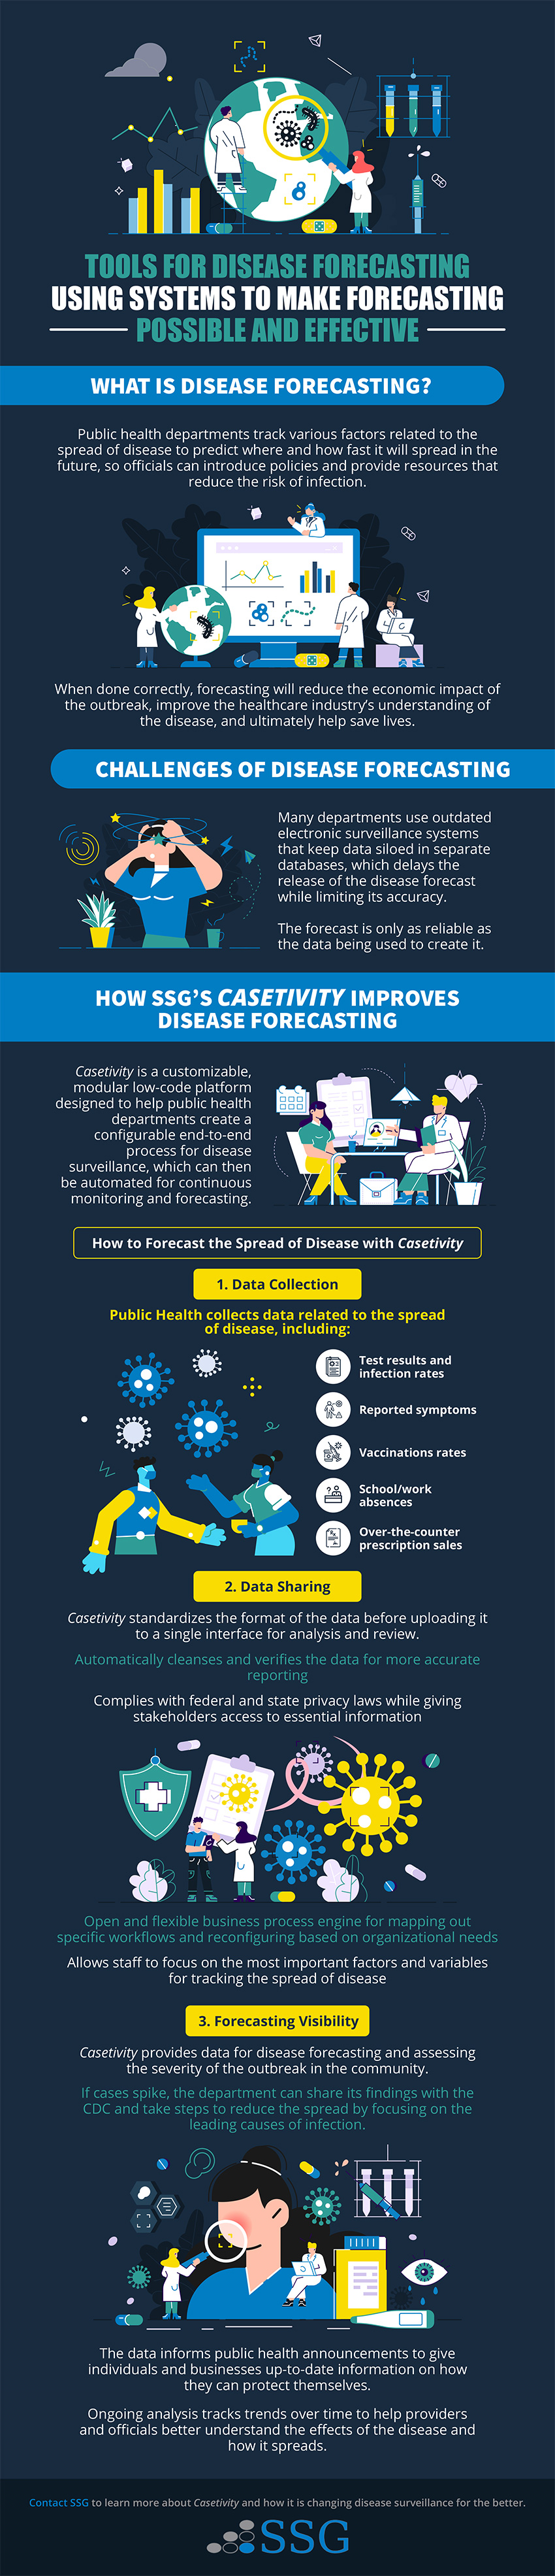 Tools for Disease Forecasting Infographic